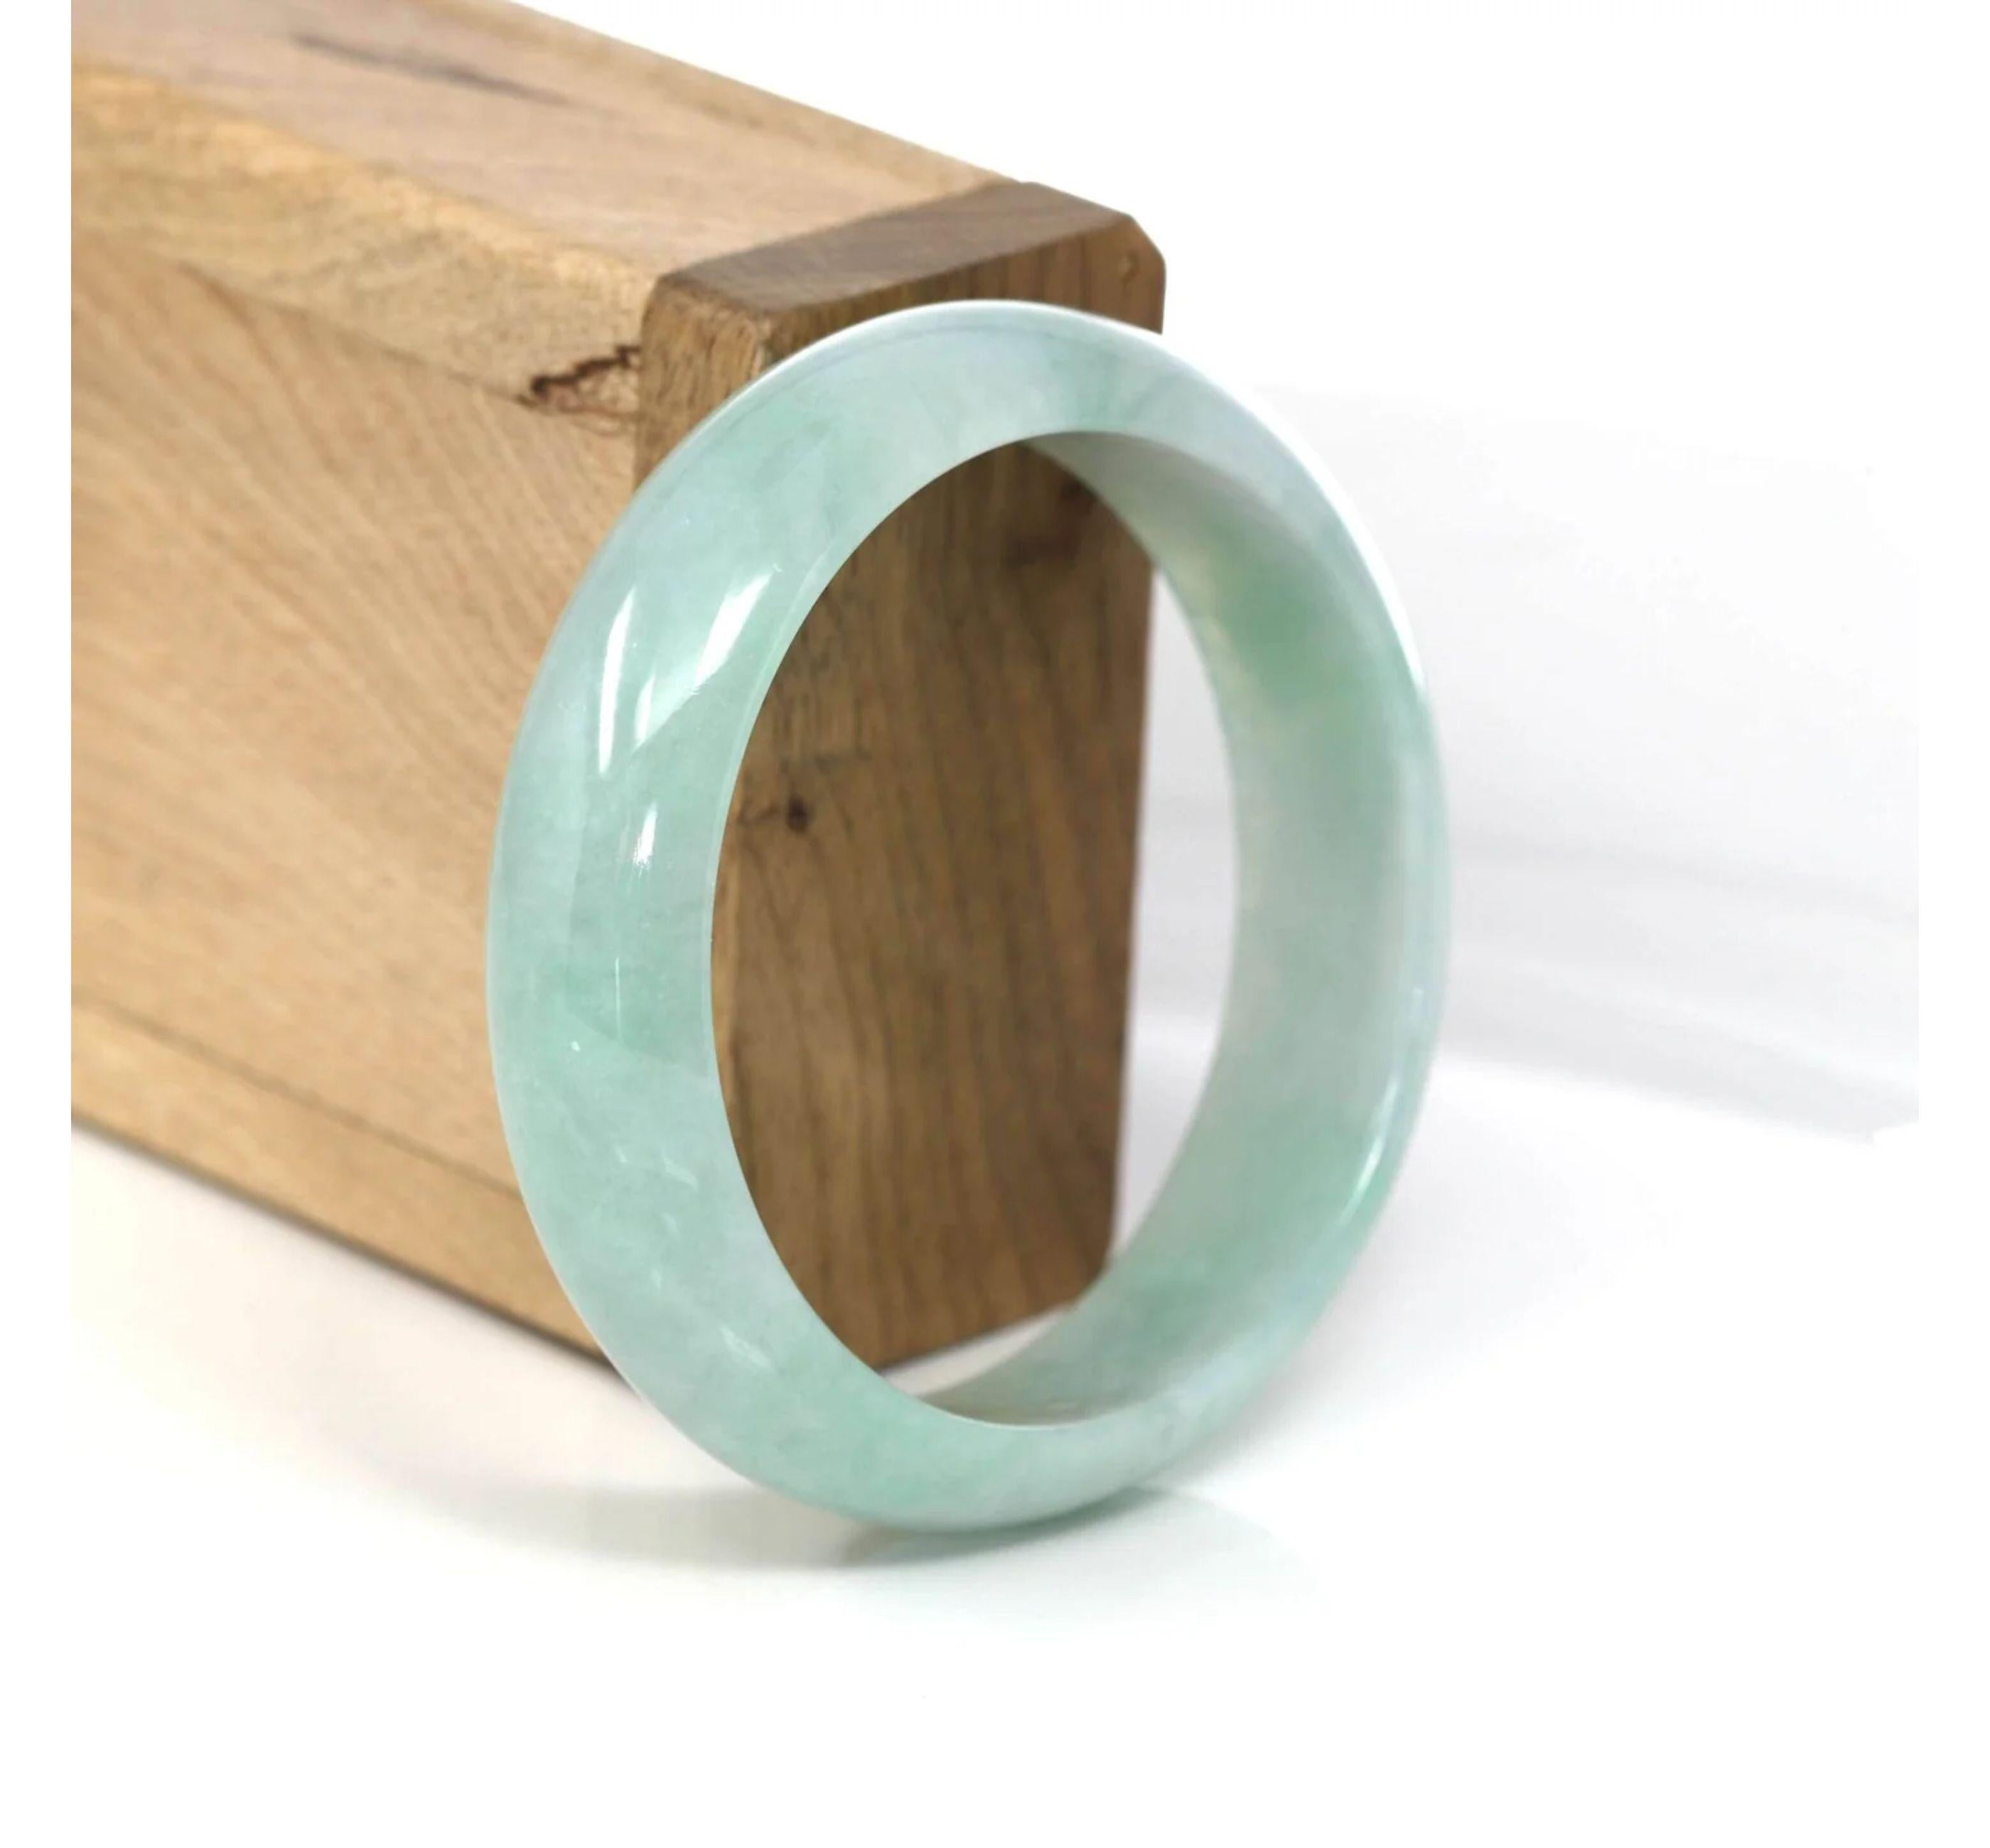  * DETAILS--- This bangle is made with fine genuine Burmese Jadeite jade. The jade texture is very good and smooth with light green. The whole bangle looks very clear with green. It's a perfect with half-round comfort style bracelet. It's a very